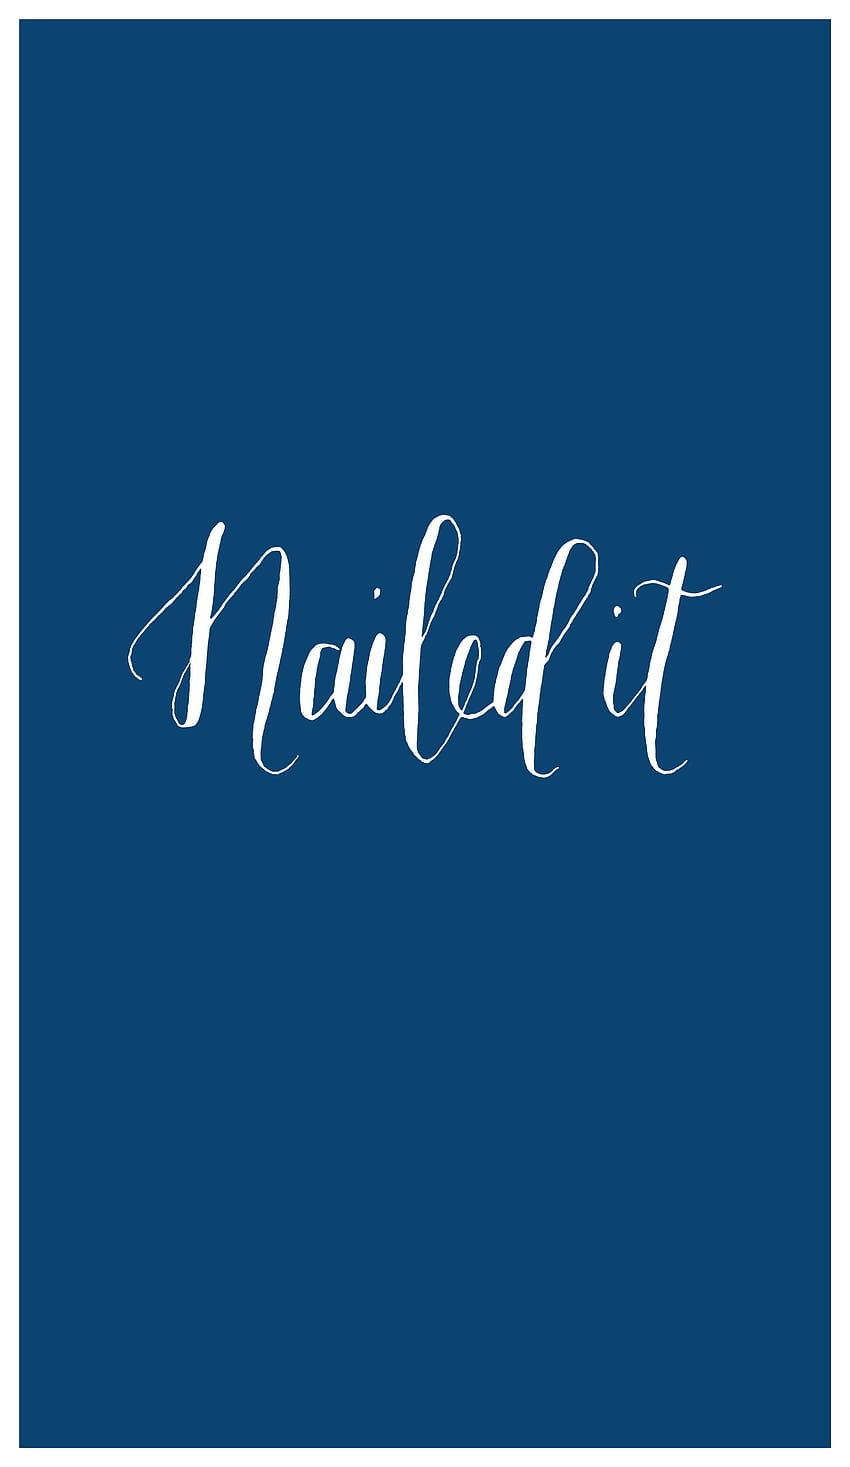 Wednesday, nailed it HD phone wallpaper